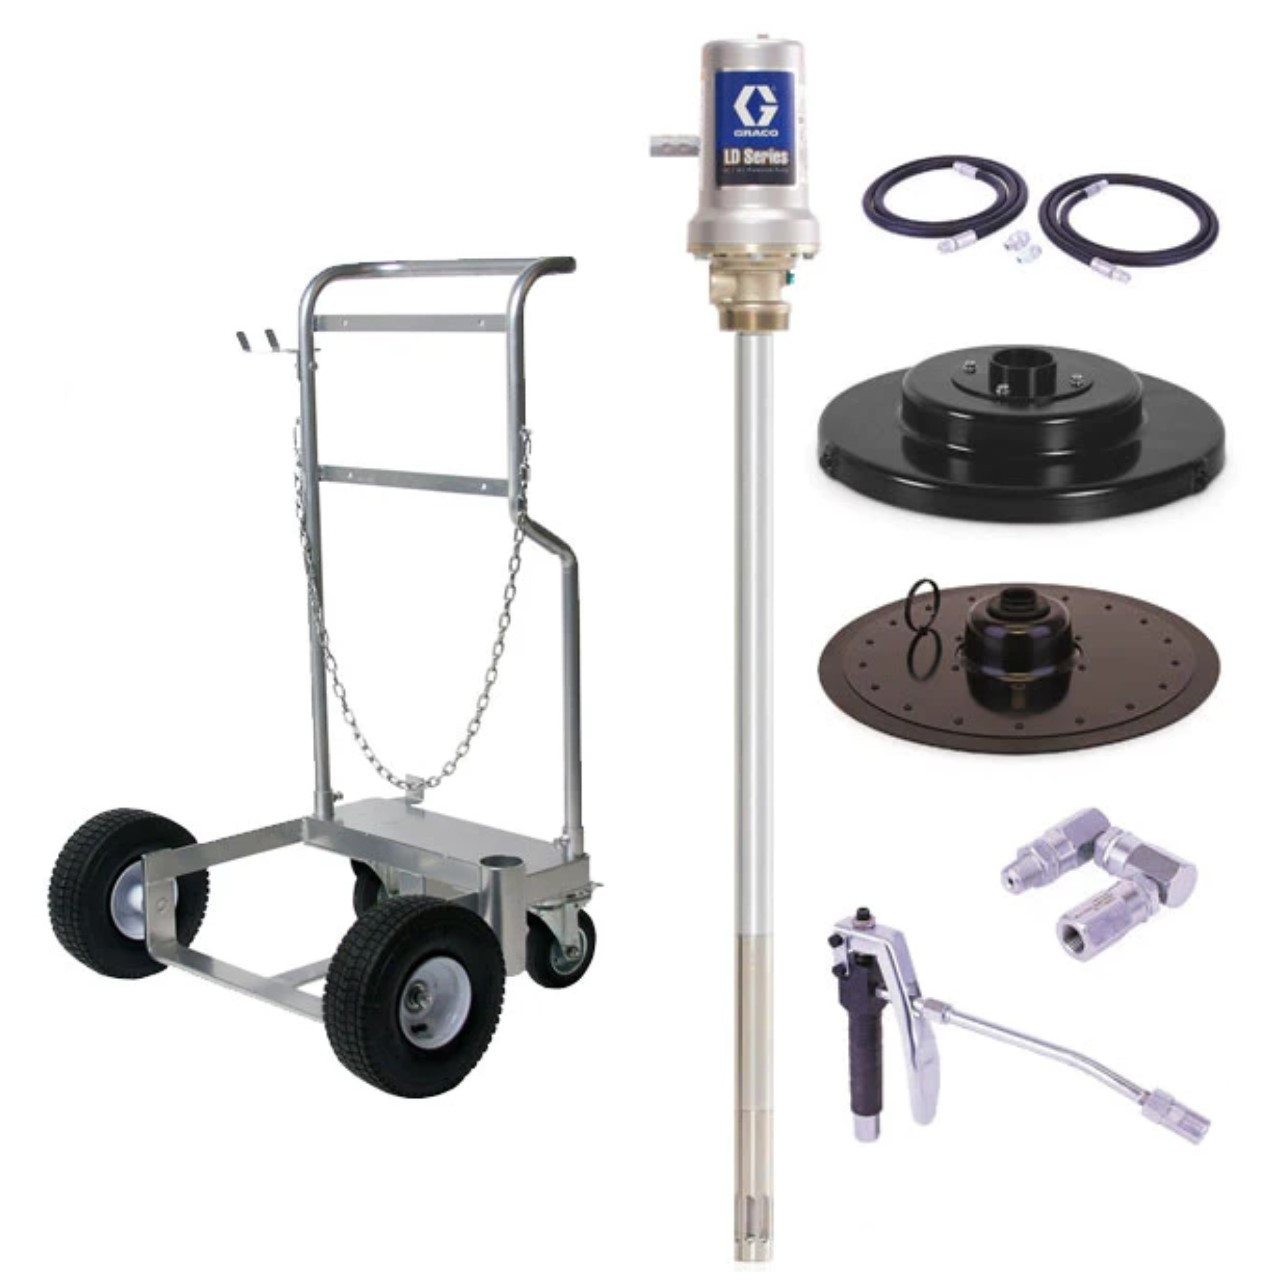 Graco LD Series 50:1 Air-Powered Grease Pump Package For 120lb Drum w/ Cart